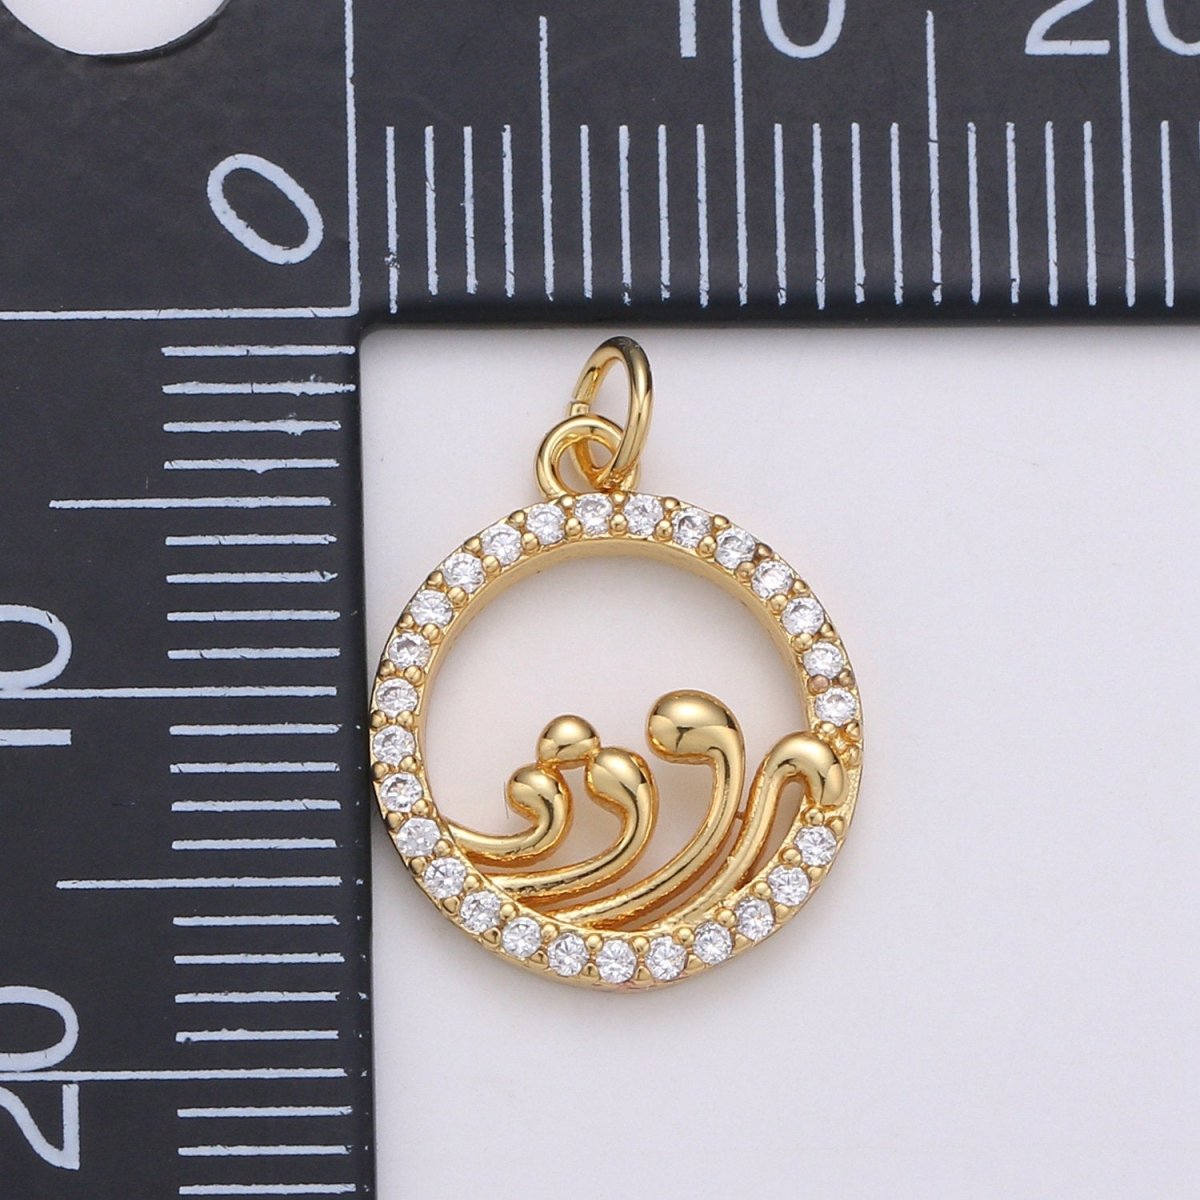 Dainty Micro Pave Water Elements Charm, Four Elements Charm, Water Element Charm, 14k Gold Filled Charm for bracelet necklace earring C-818 - DLUXCA